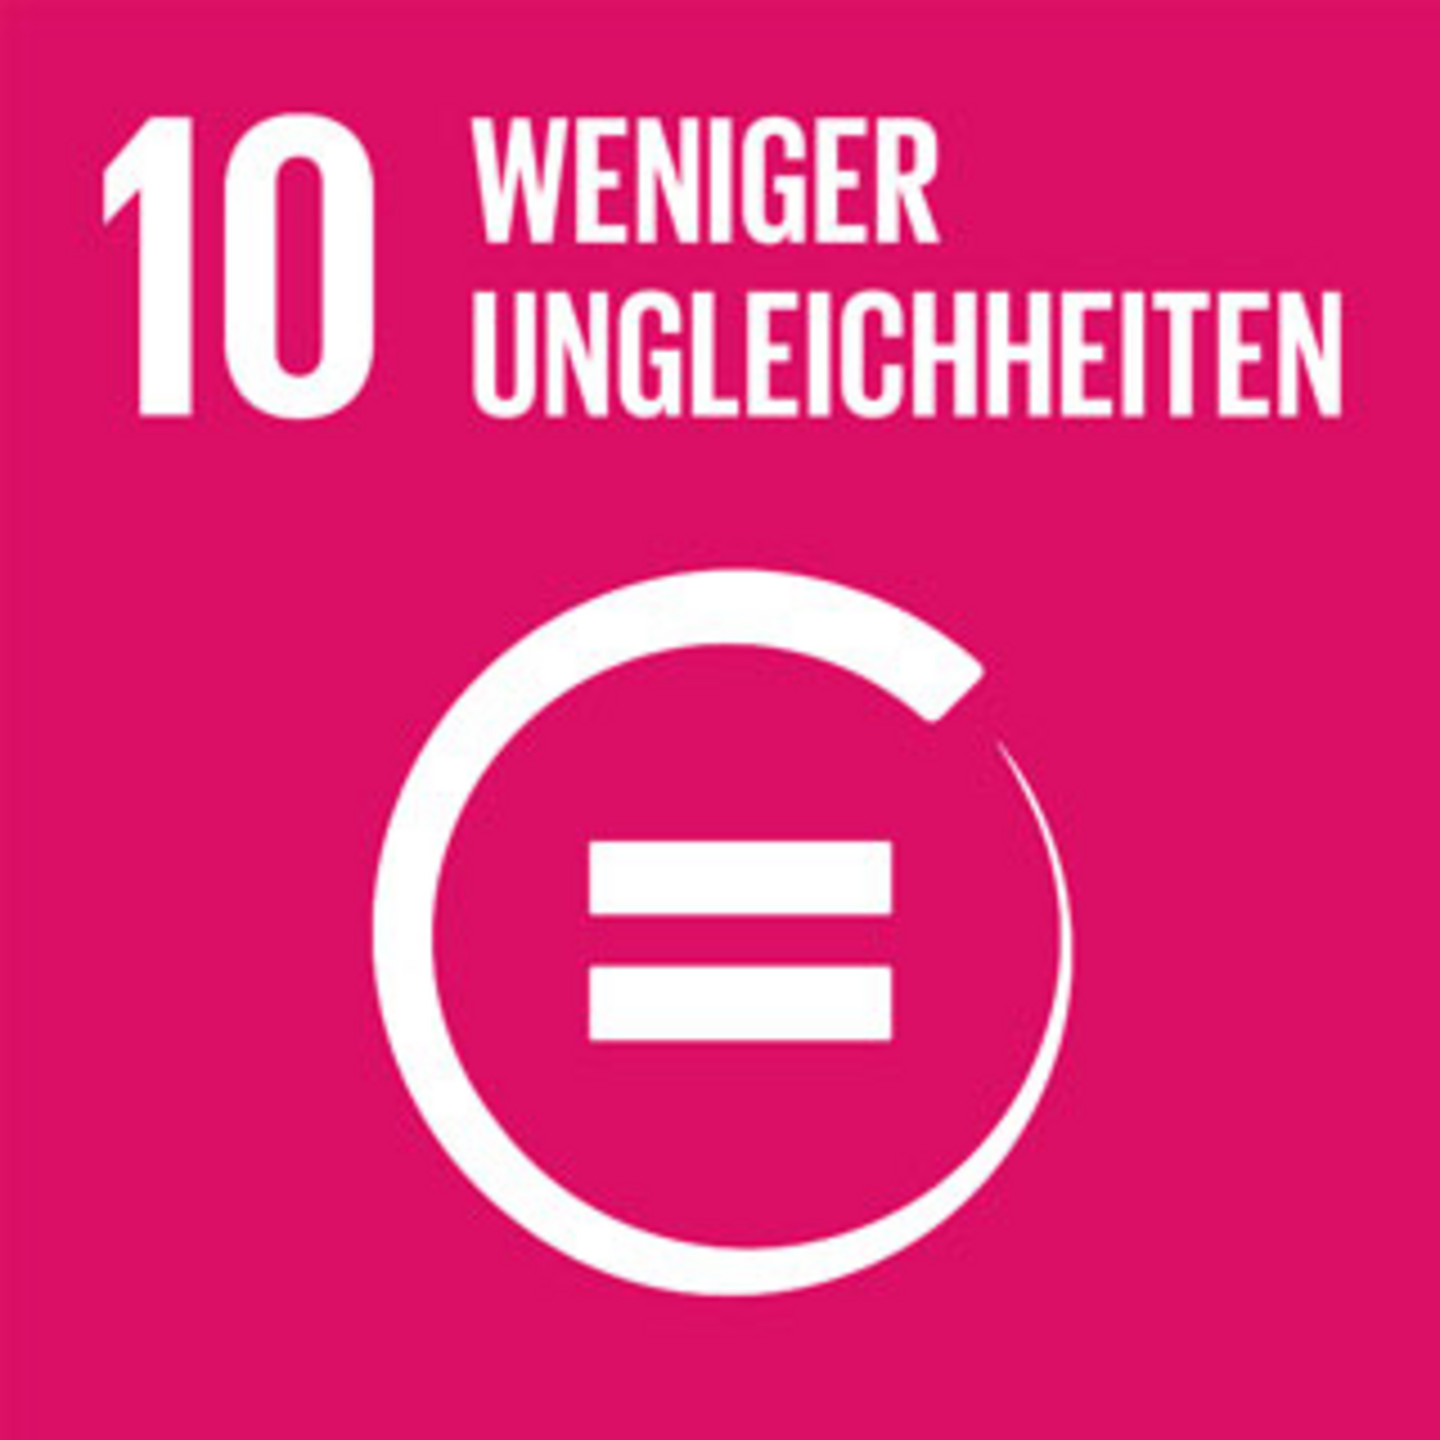  A pink background with the words "Less inequality".